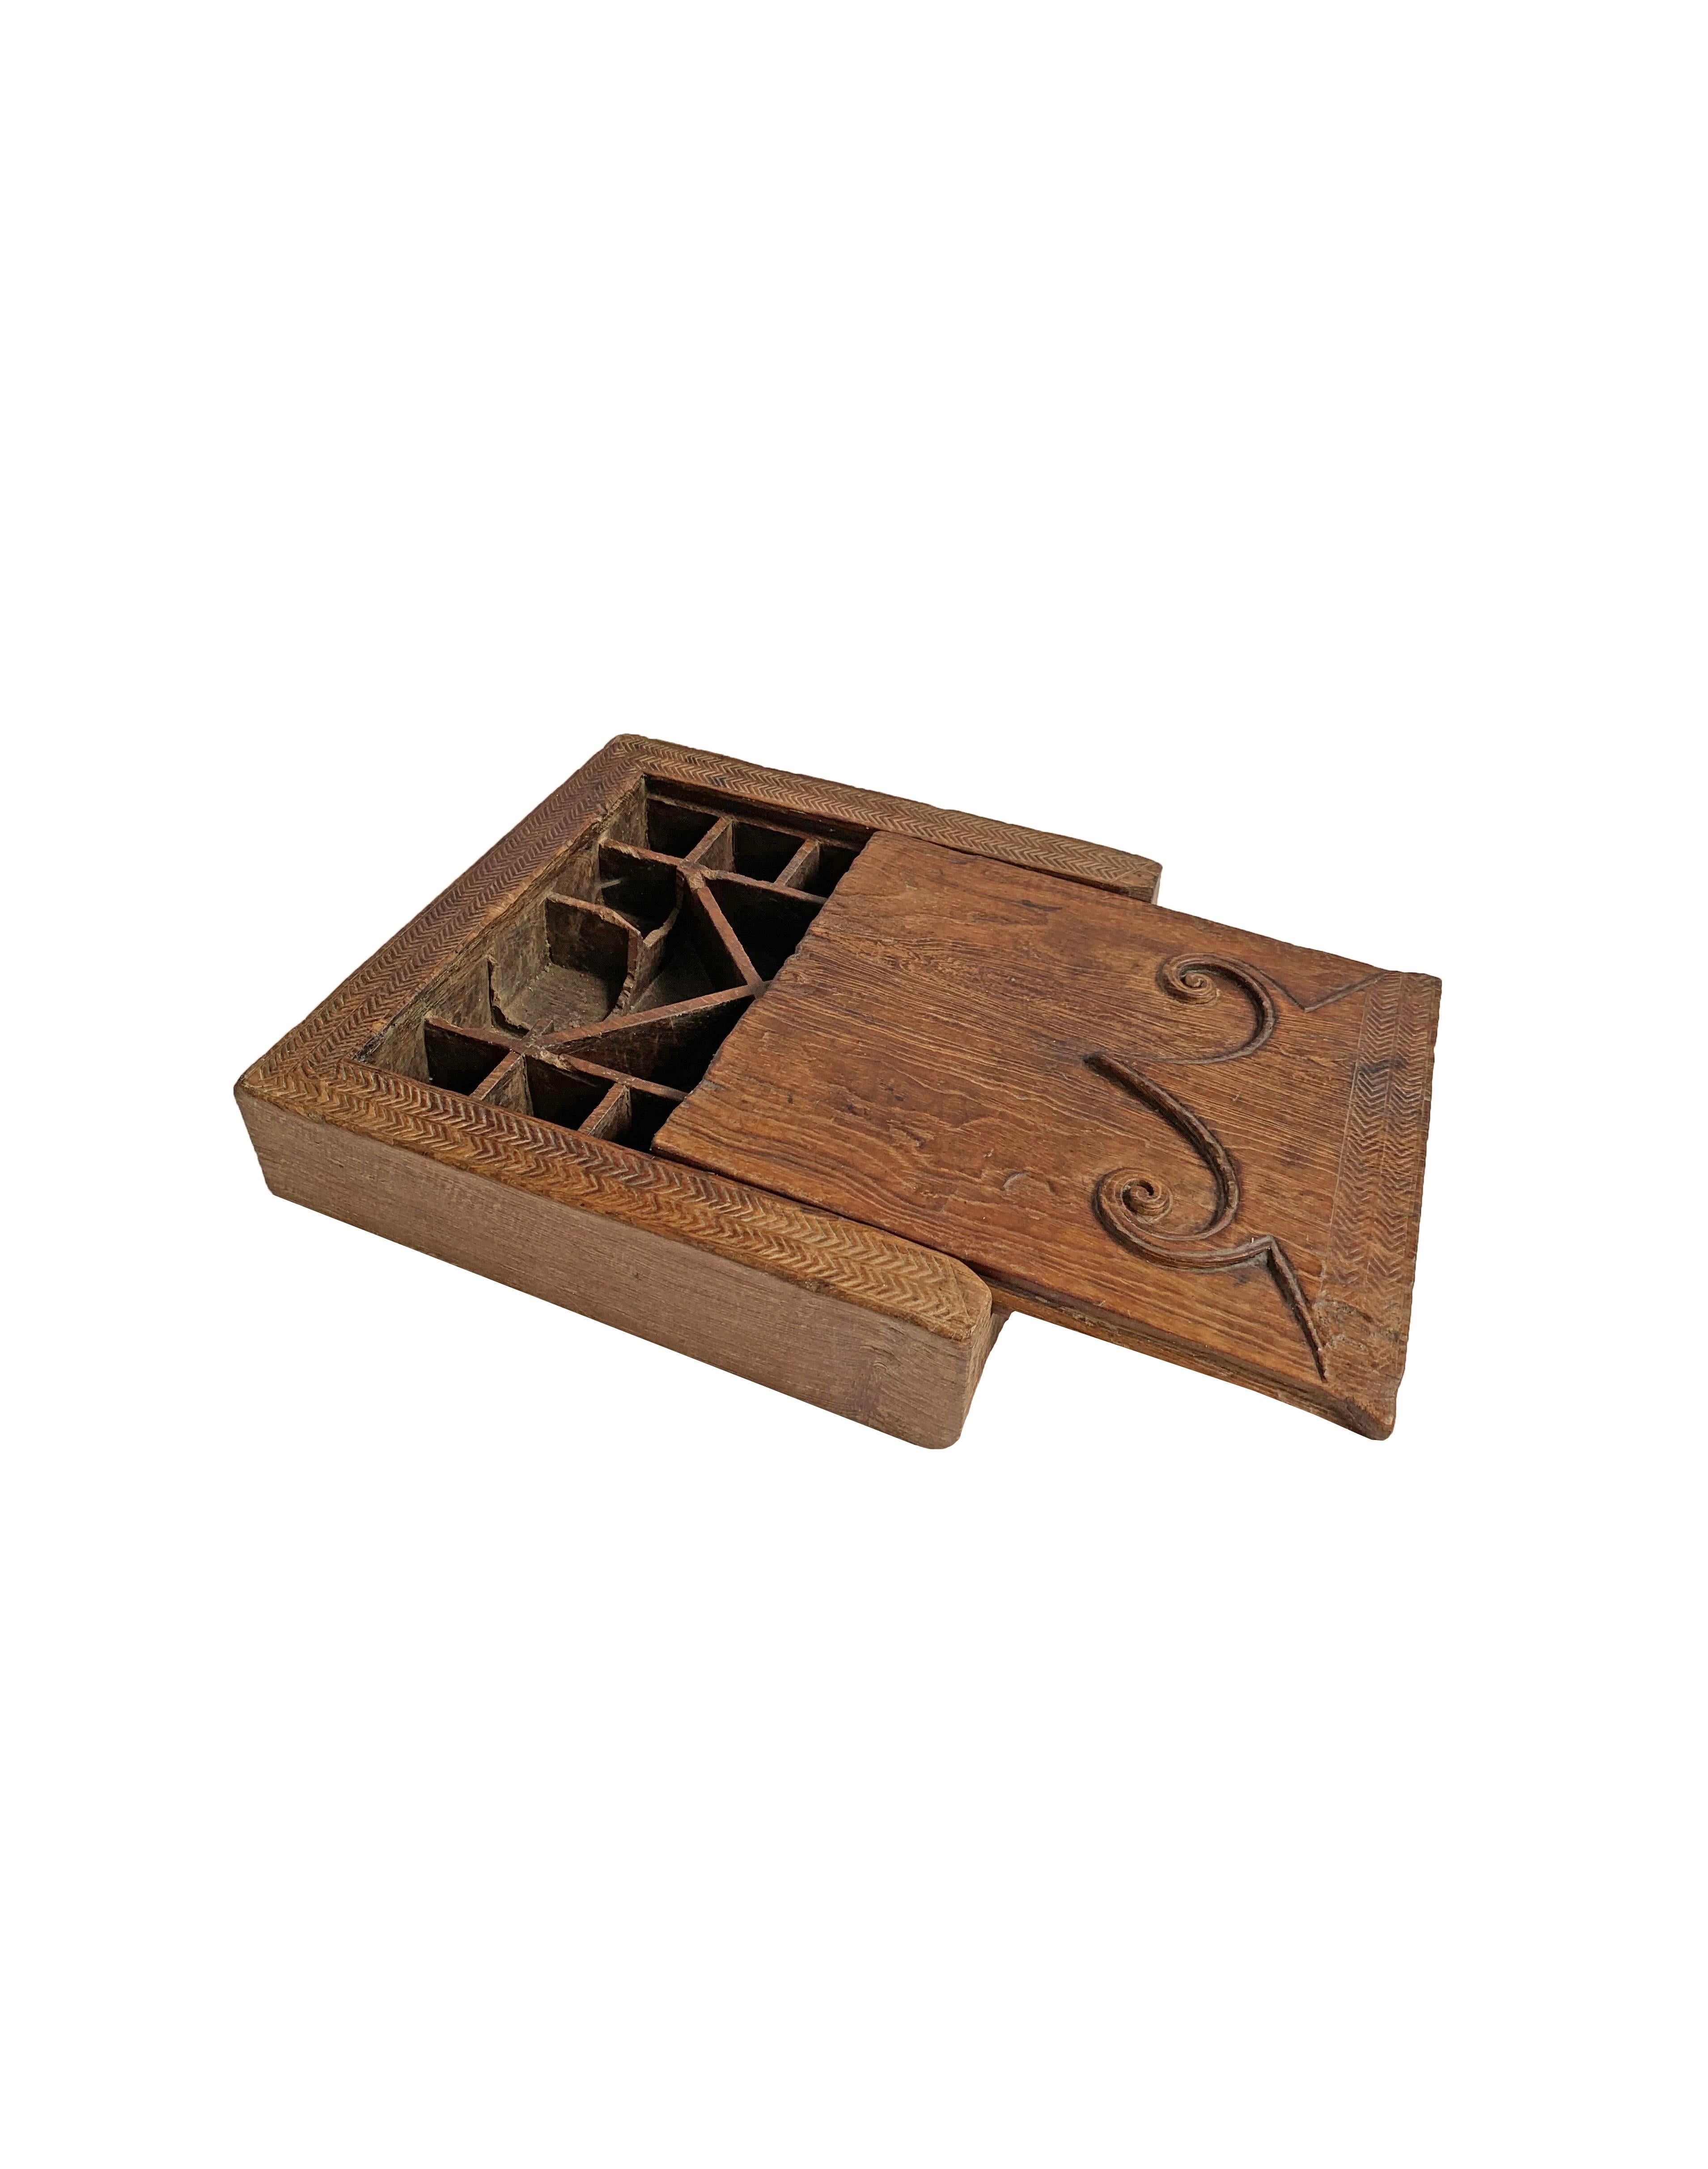 This spice box comes for the Island of Nias, Indonesia. Dating to the early 20th Century it was crafted from a single block of wood. It features a sliding lid, has an elegant wood texture as well as stunning tribal wood engravings. A wonderful